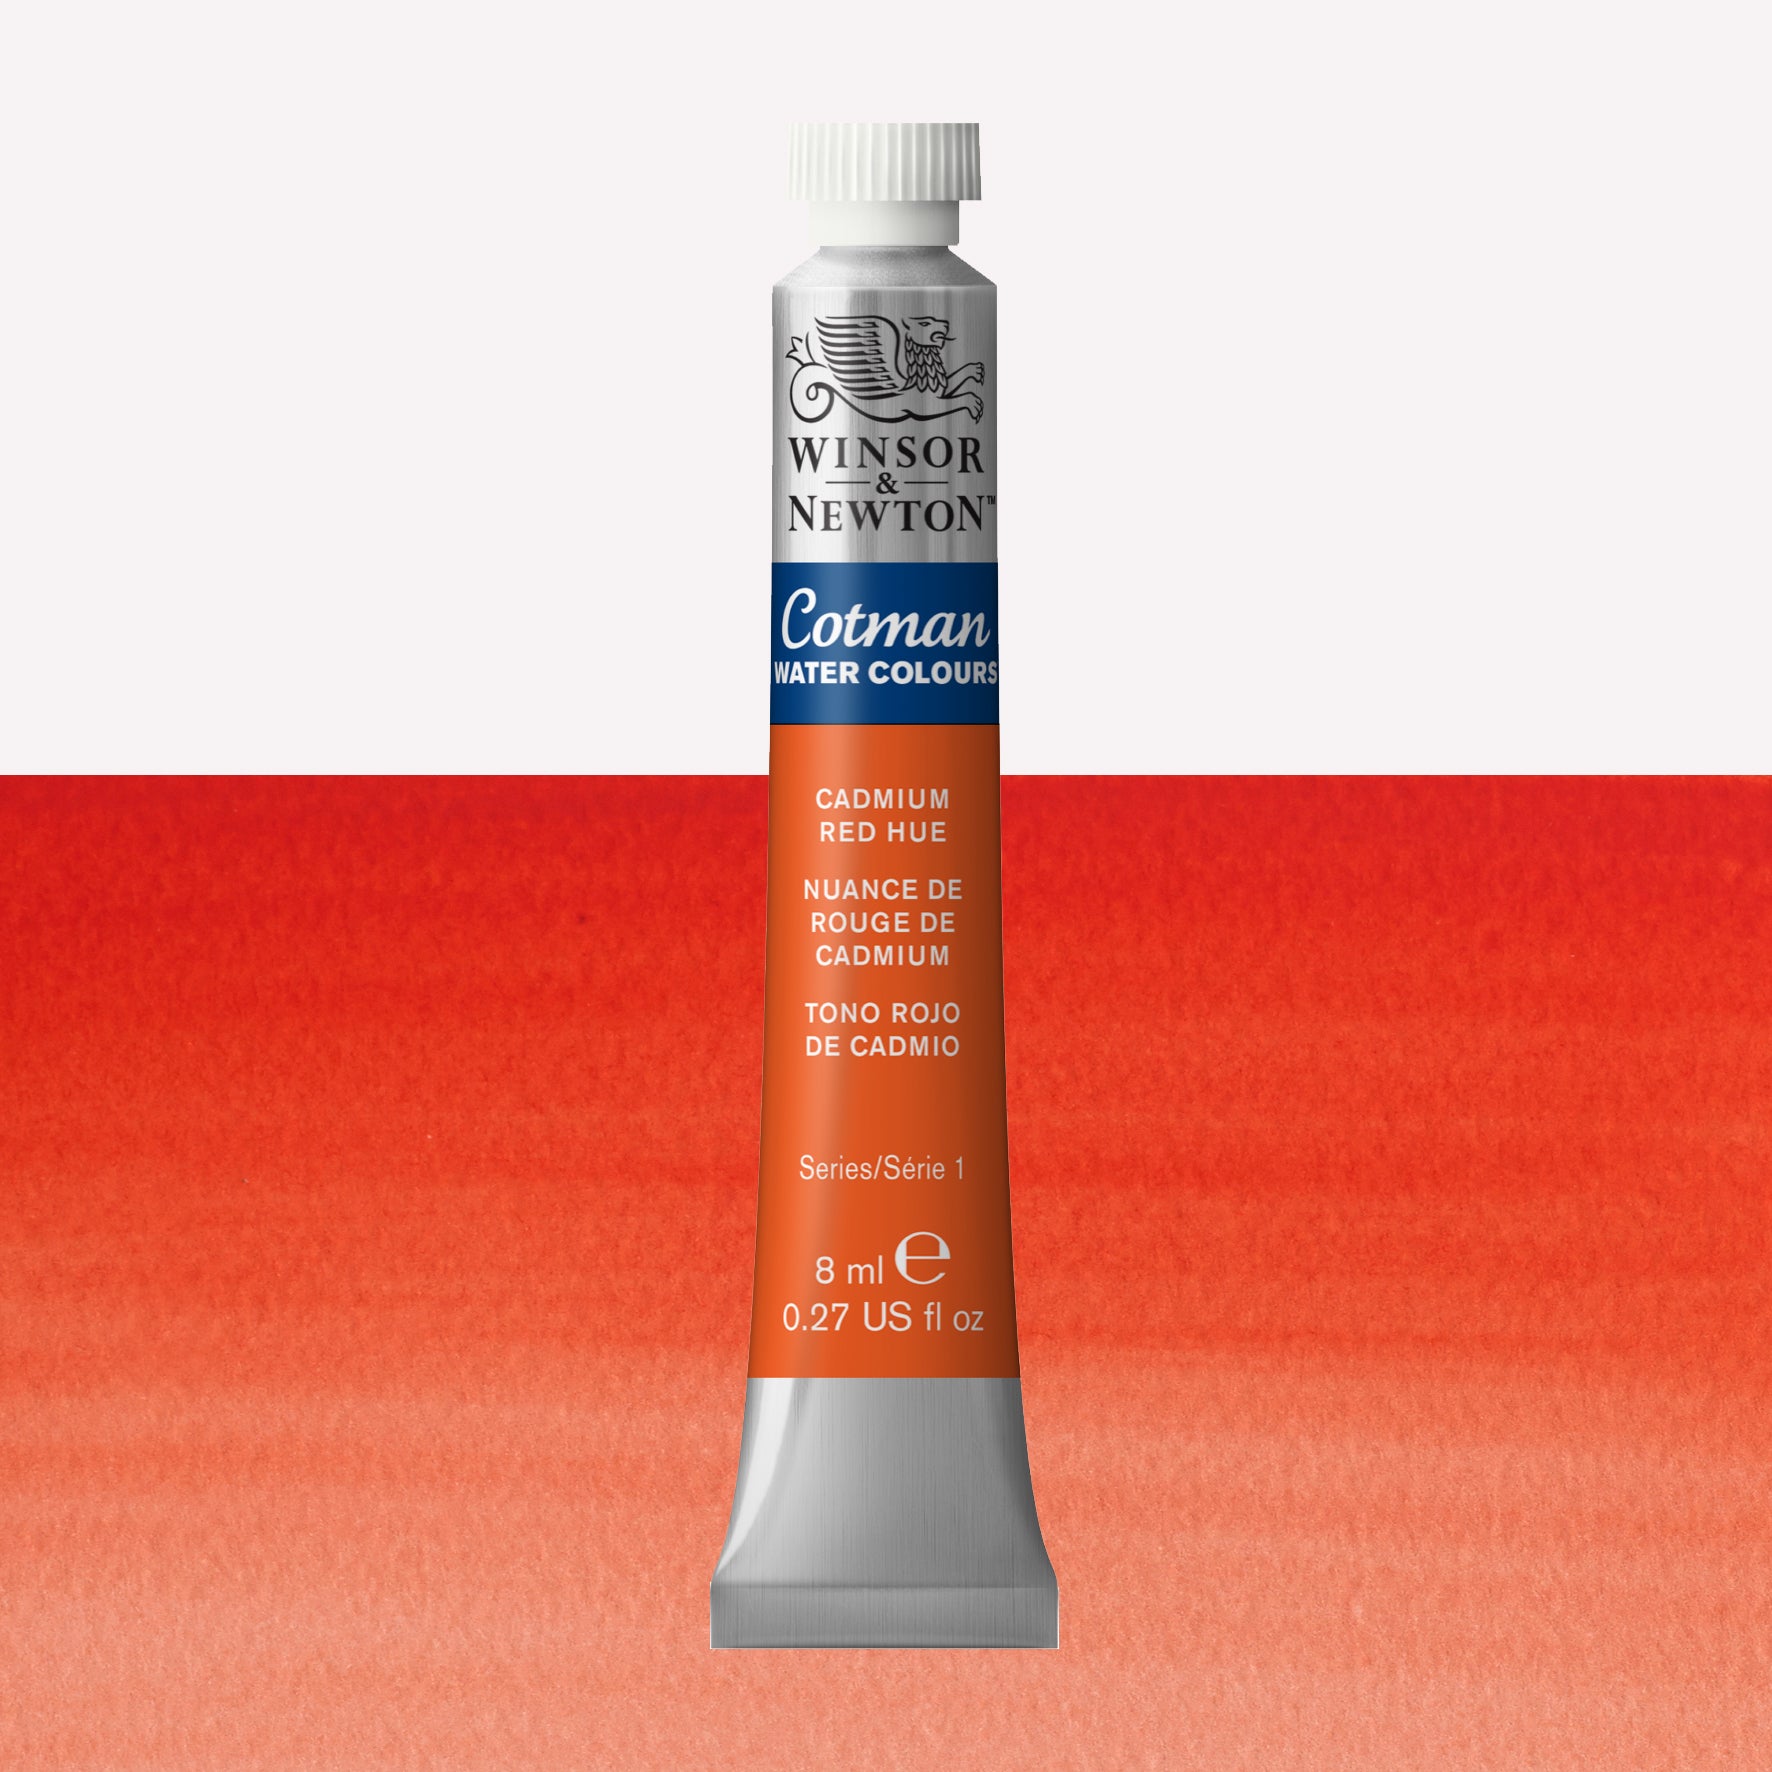 Winsor & Newton Cotman watercolour paint packaged in 8ml silver tubes with a white lid in the shade Cadmium Red Hue  over a highly pigmented colour swatch.